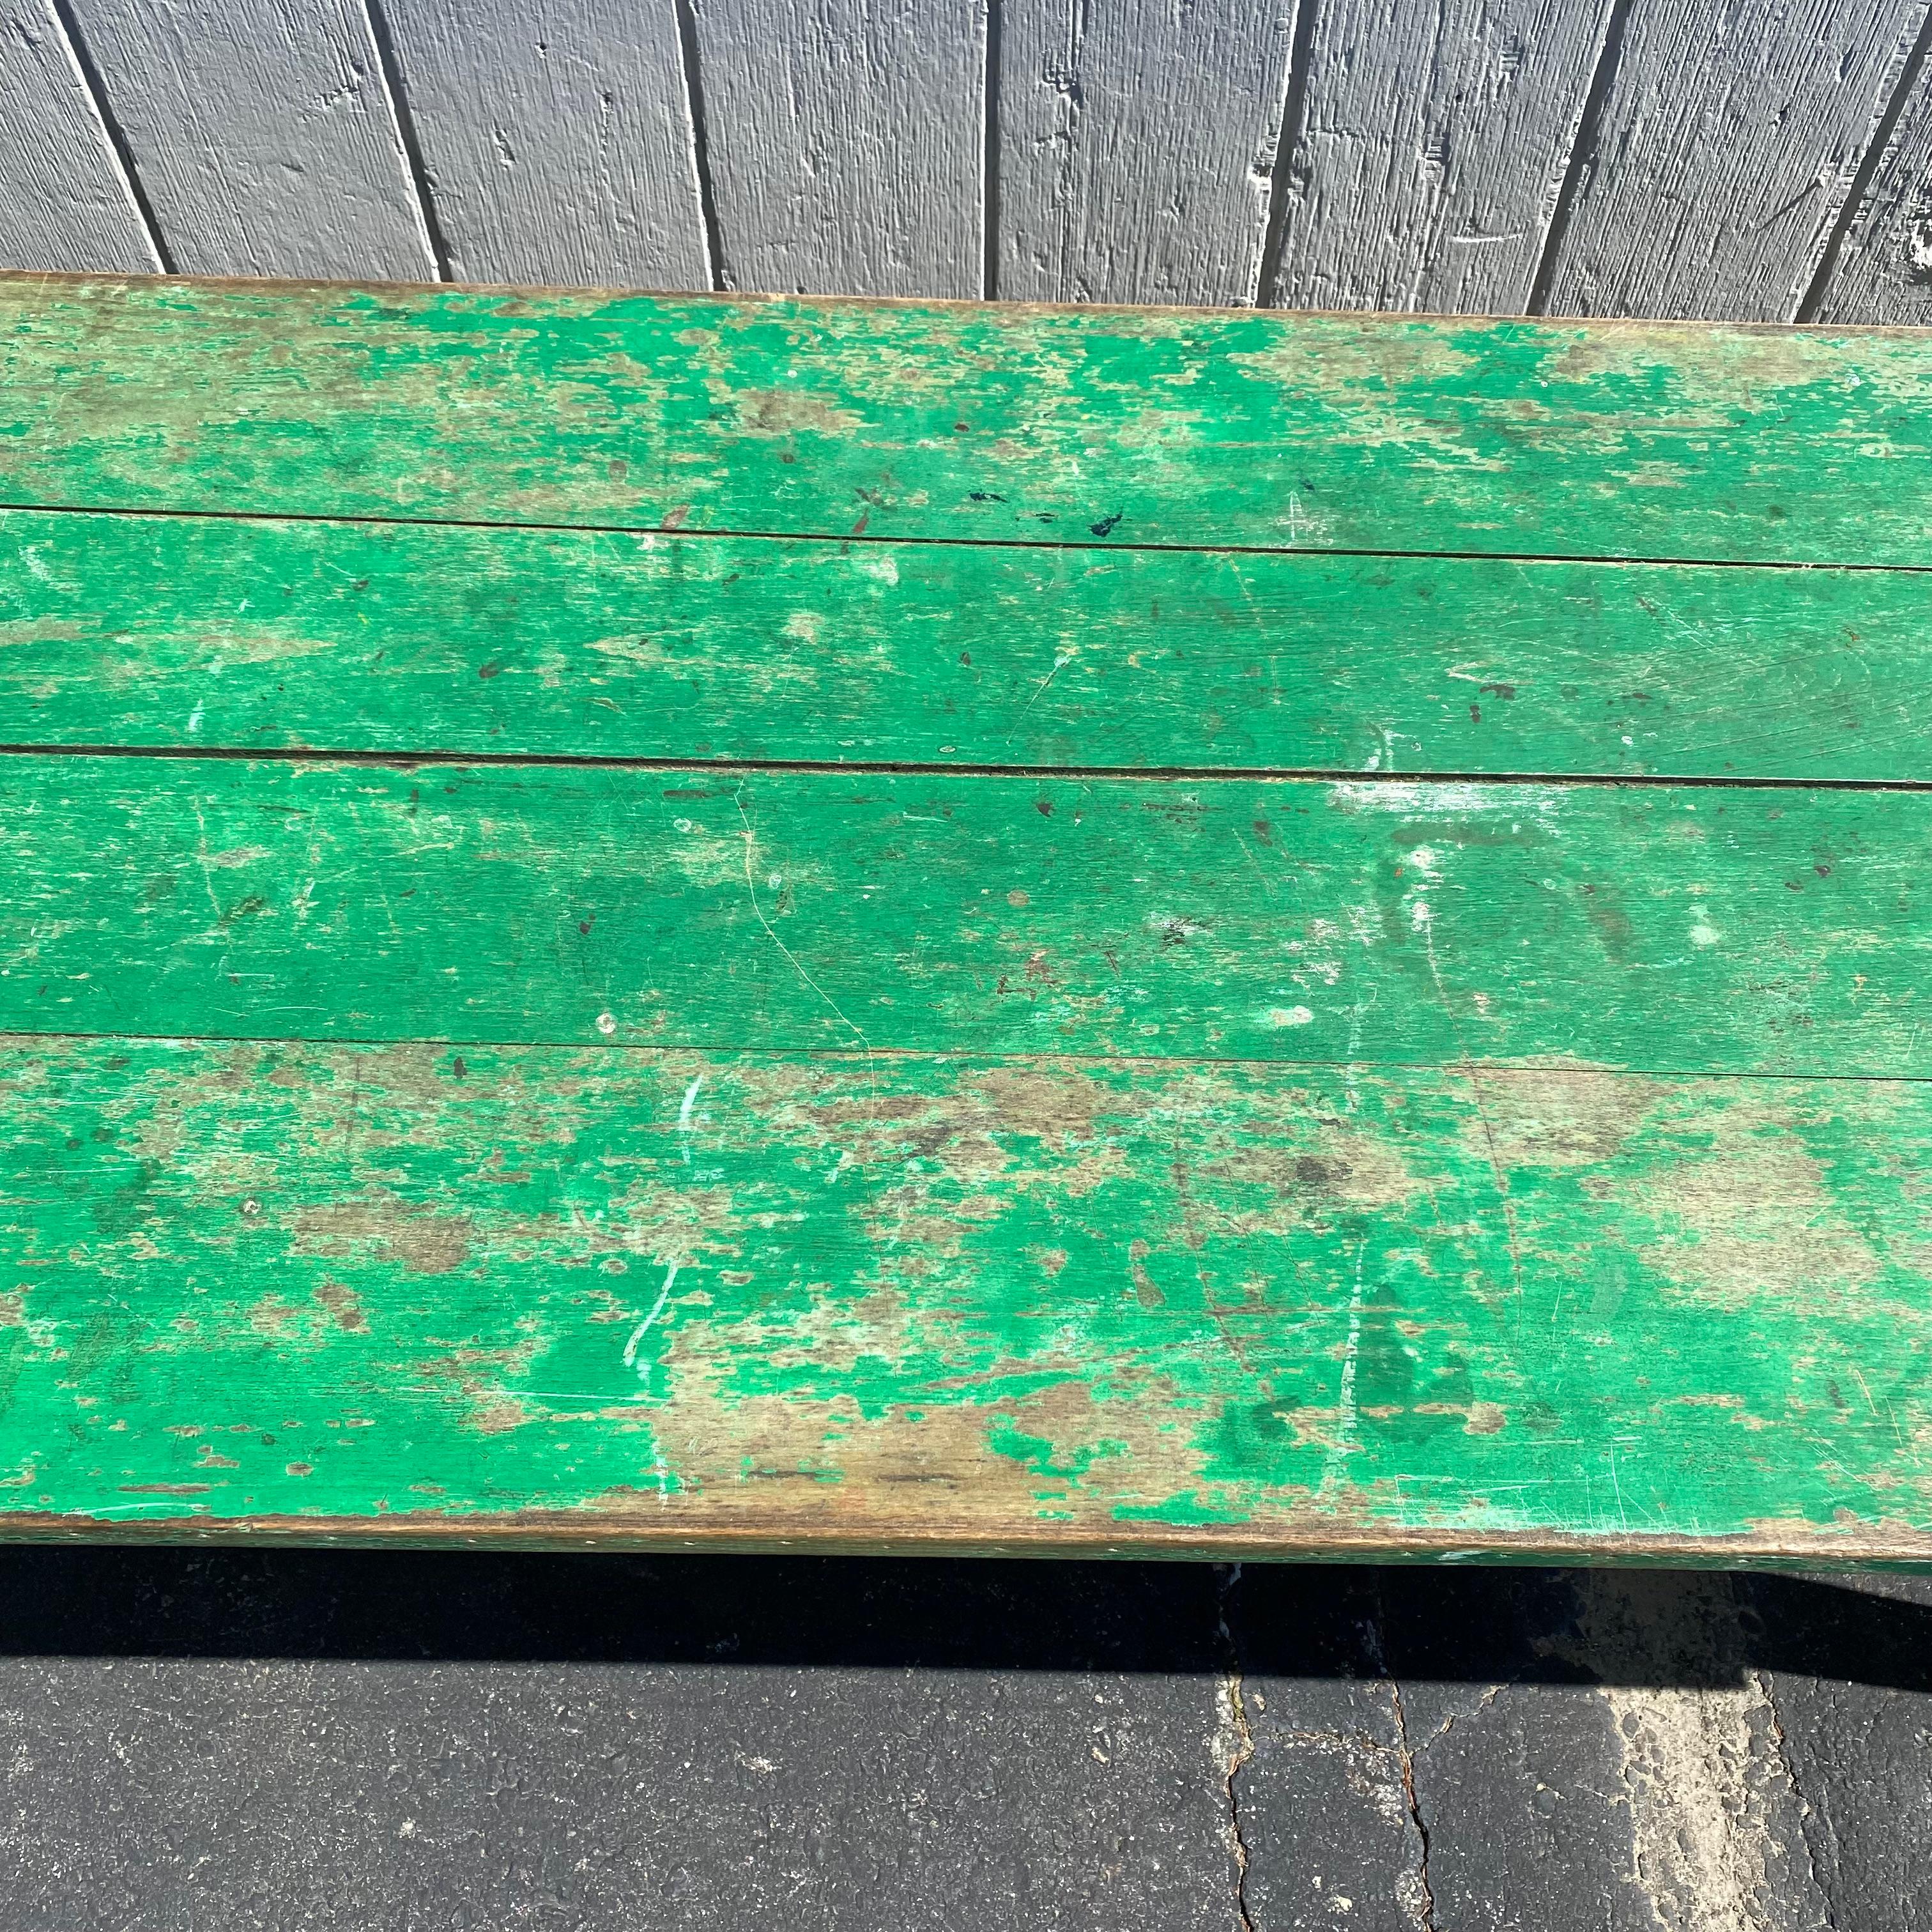 Hand-Painted French Country Provinicial Farm Table with Original Green Paint